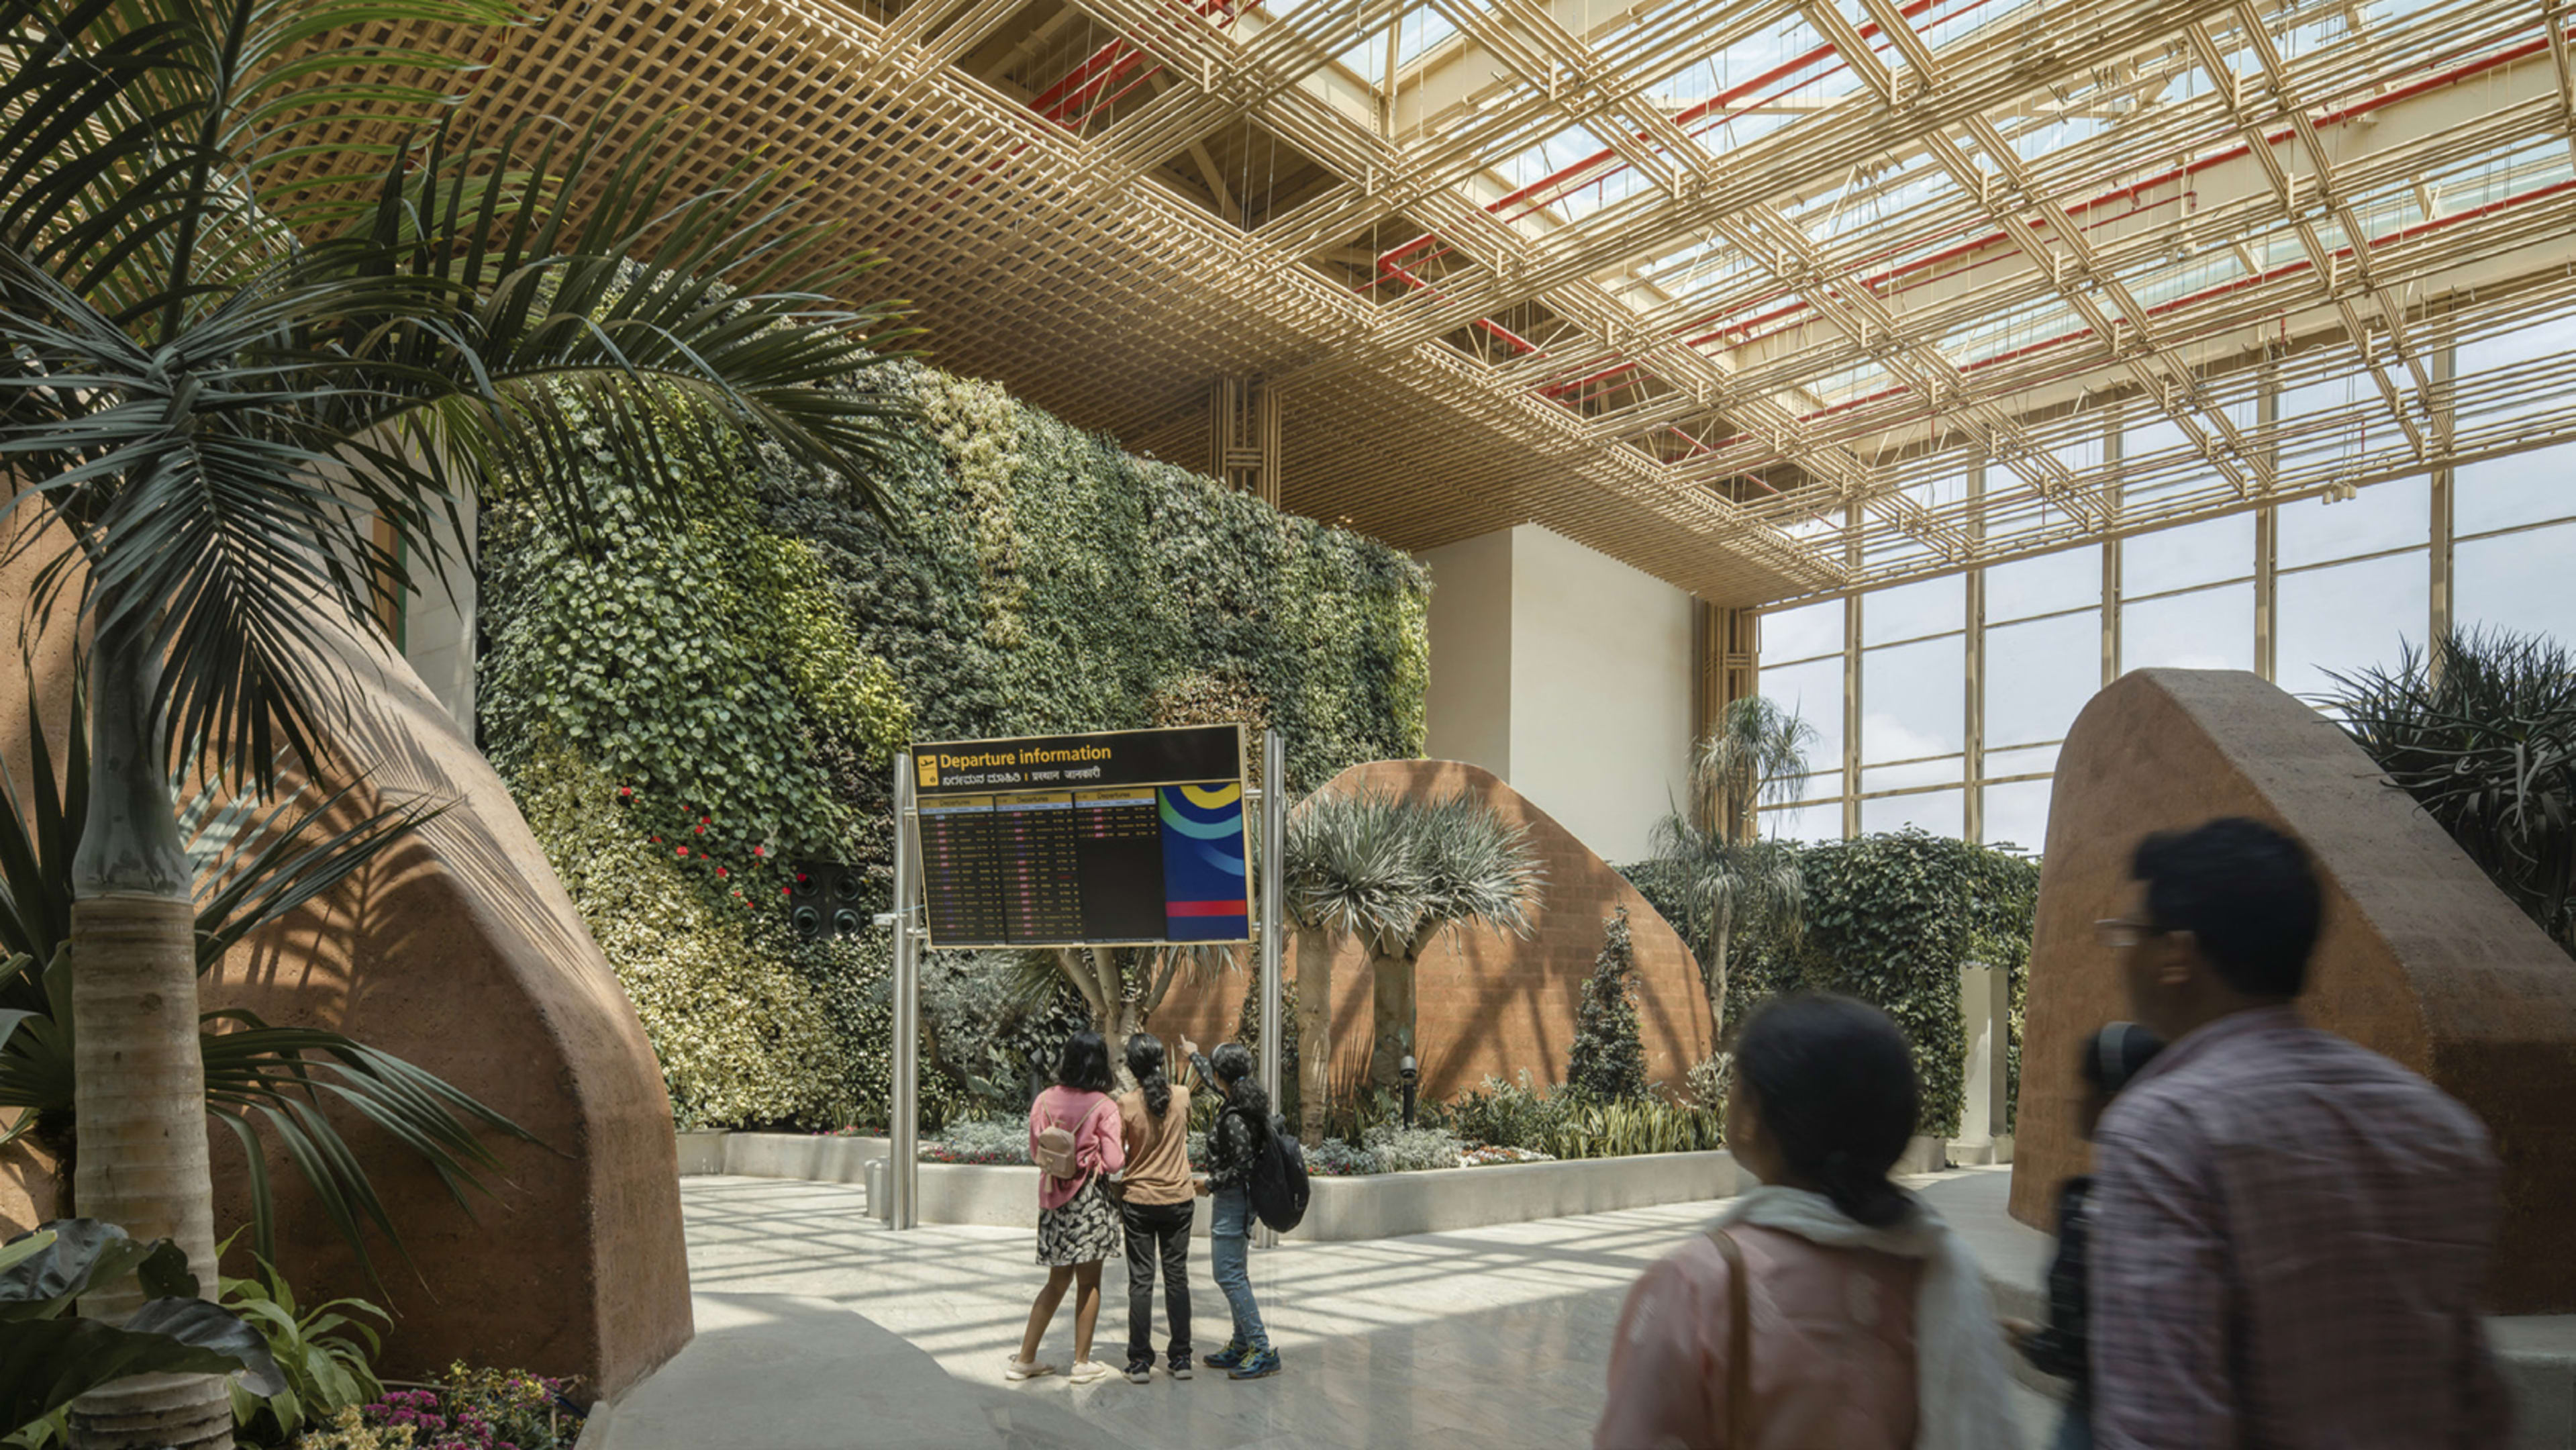 This amazing new Indian airport will make you hate U.S. airports even more